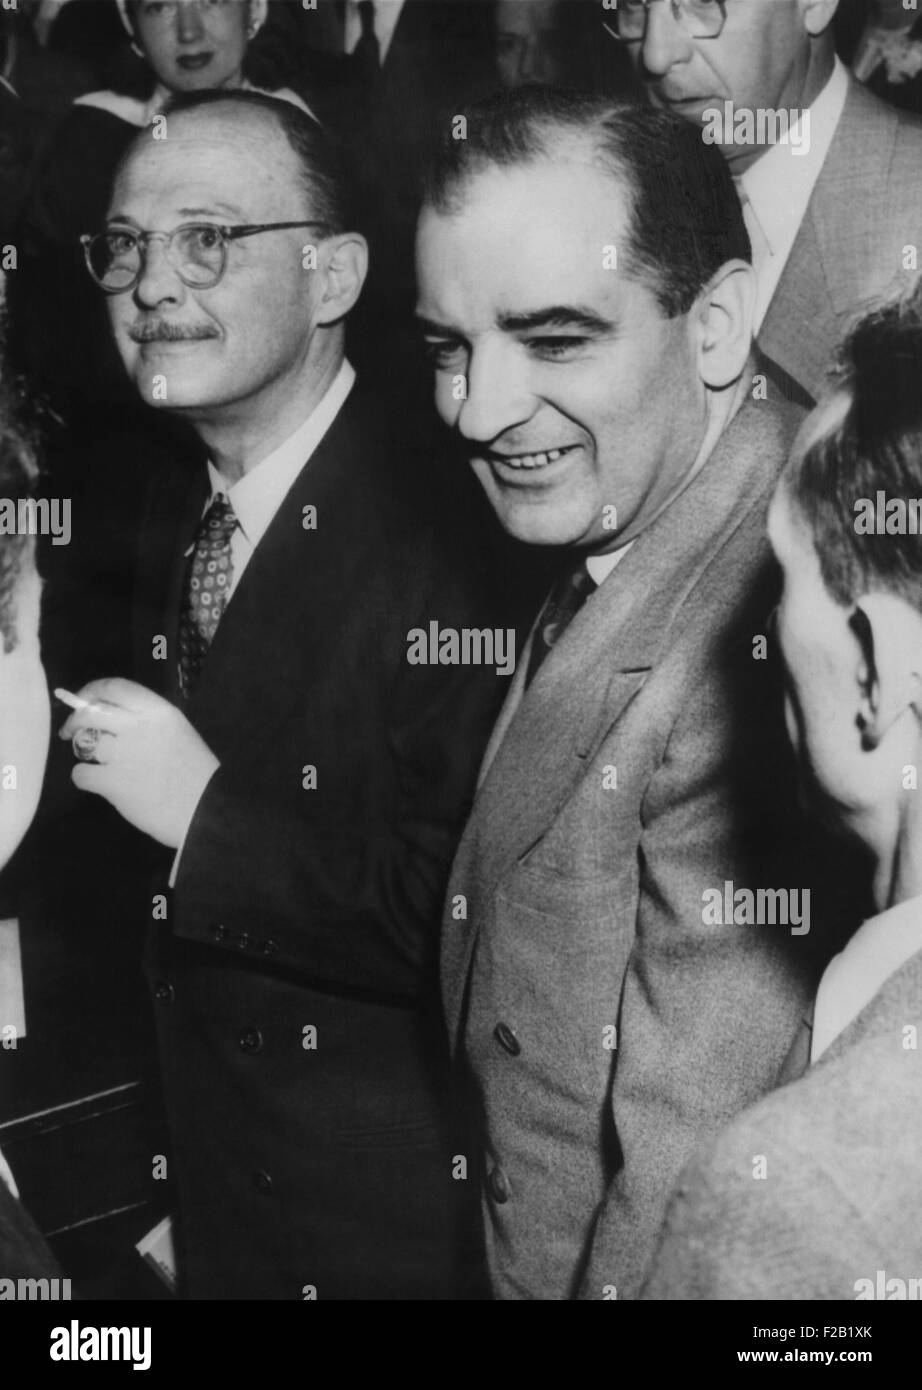 Owen Lattimore (left) and Sen. Joseph McCarthy, pass each other during break in Senate hearing. April 20, 1950. McCarthy accused Lattimore of being Russia's top espionage agent, based on the unsubstantiated reports of Louis Budenz, ex-communist. (CSU 2015 8 570) Stock Photo